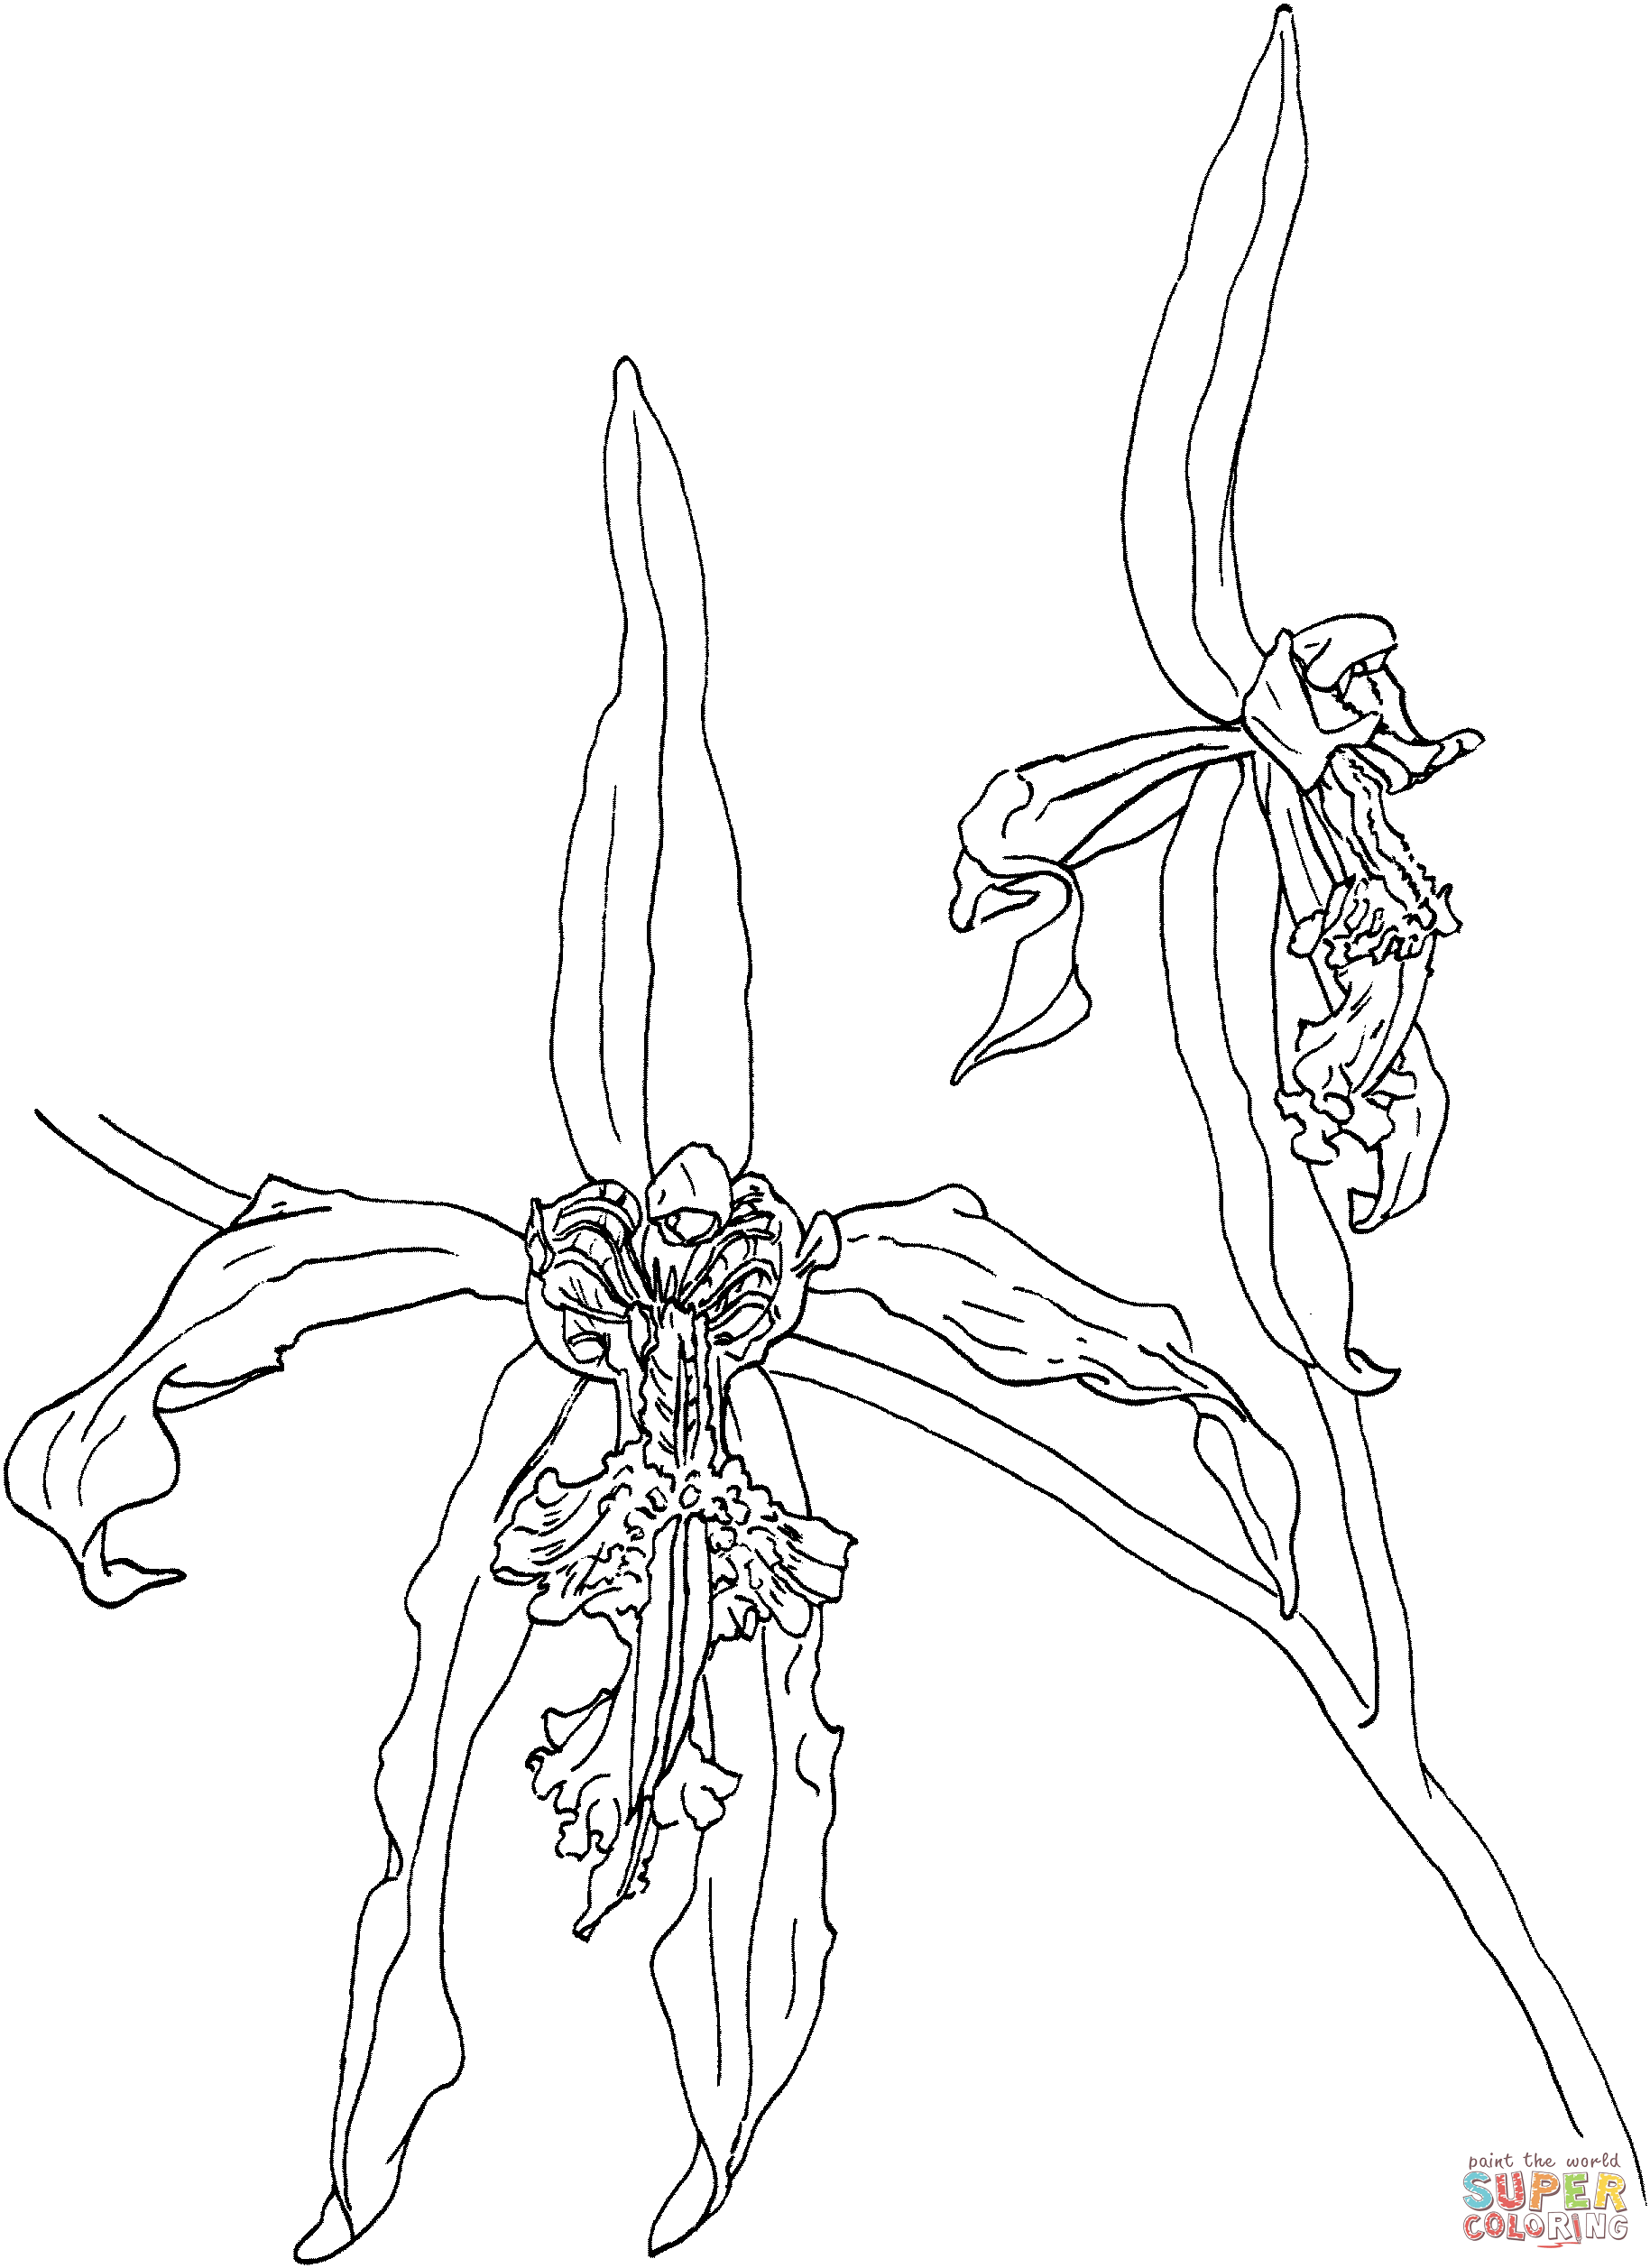 Black Orchid Coloring Page